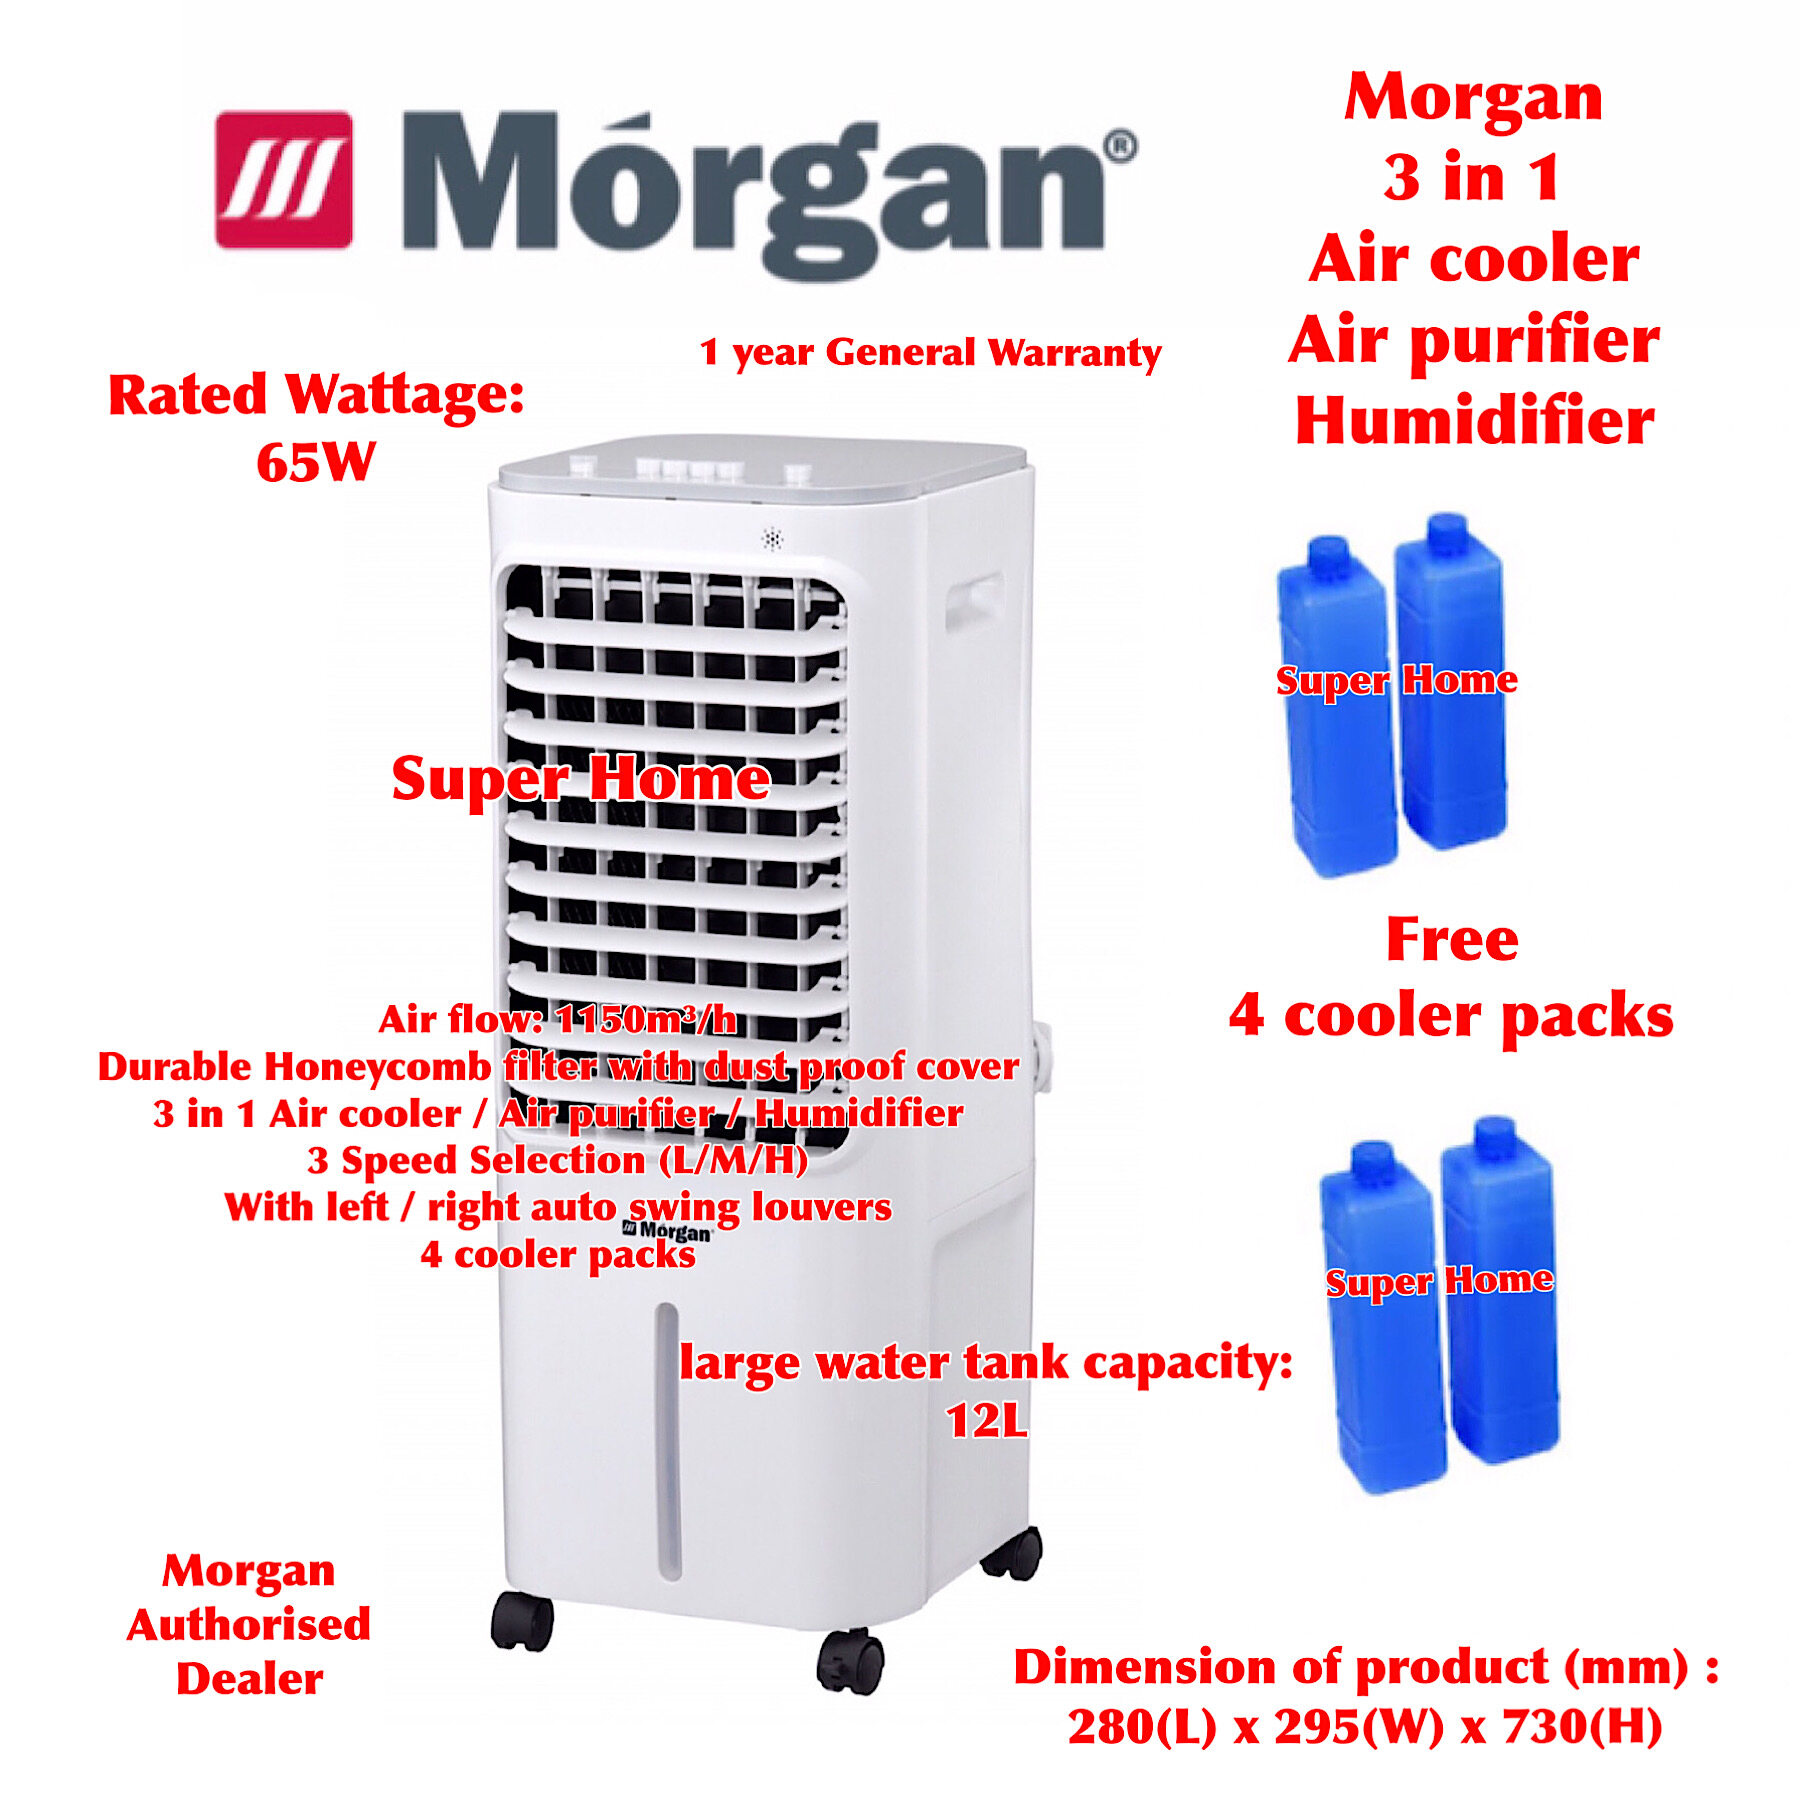 Morgan Air Coller MAC-CX12 (12L) - 3 in 1 Air cooler with Air purifier with Humidifier - Free 4 cooler packs